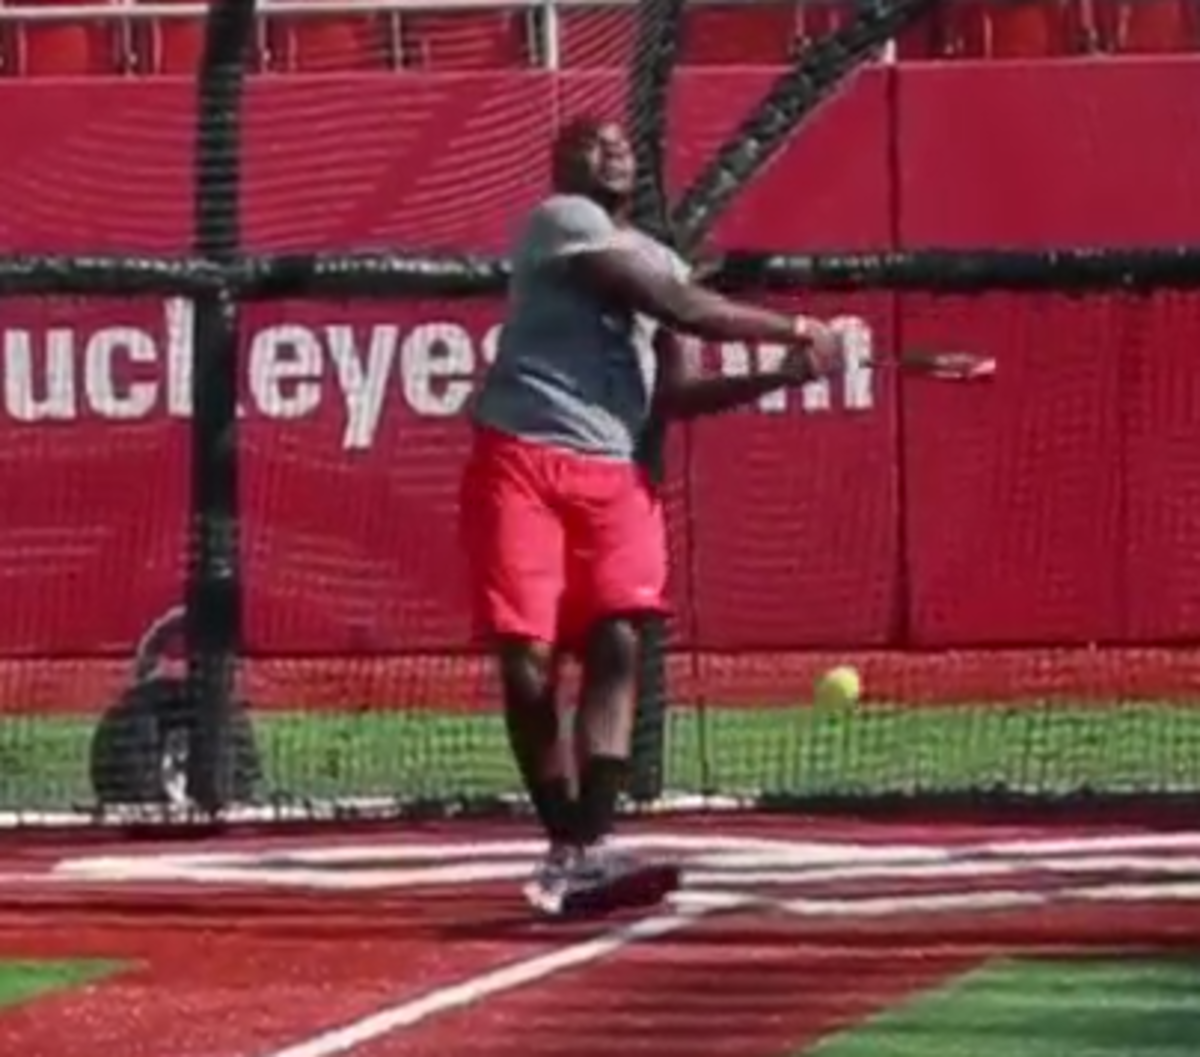 Cardale Jones swings and terribly misses a softball.